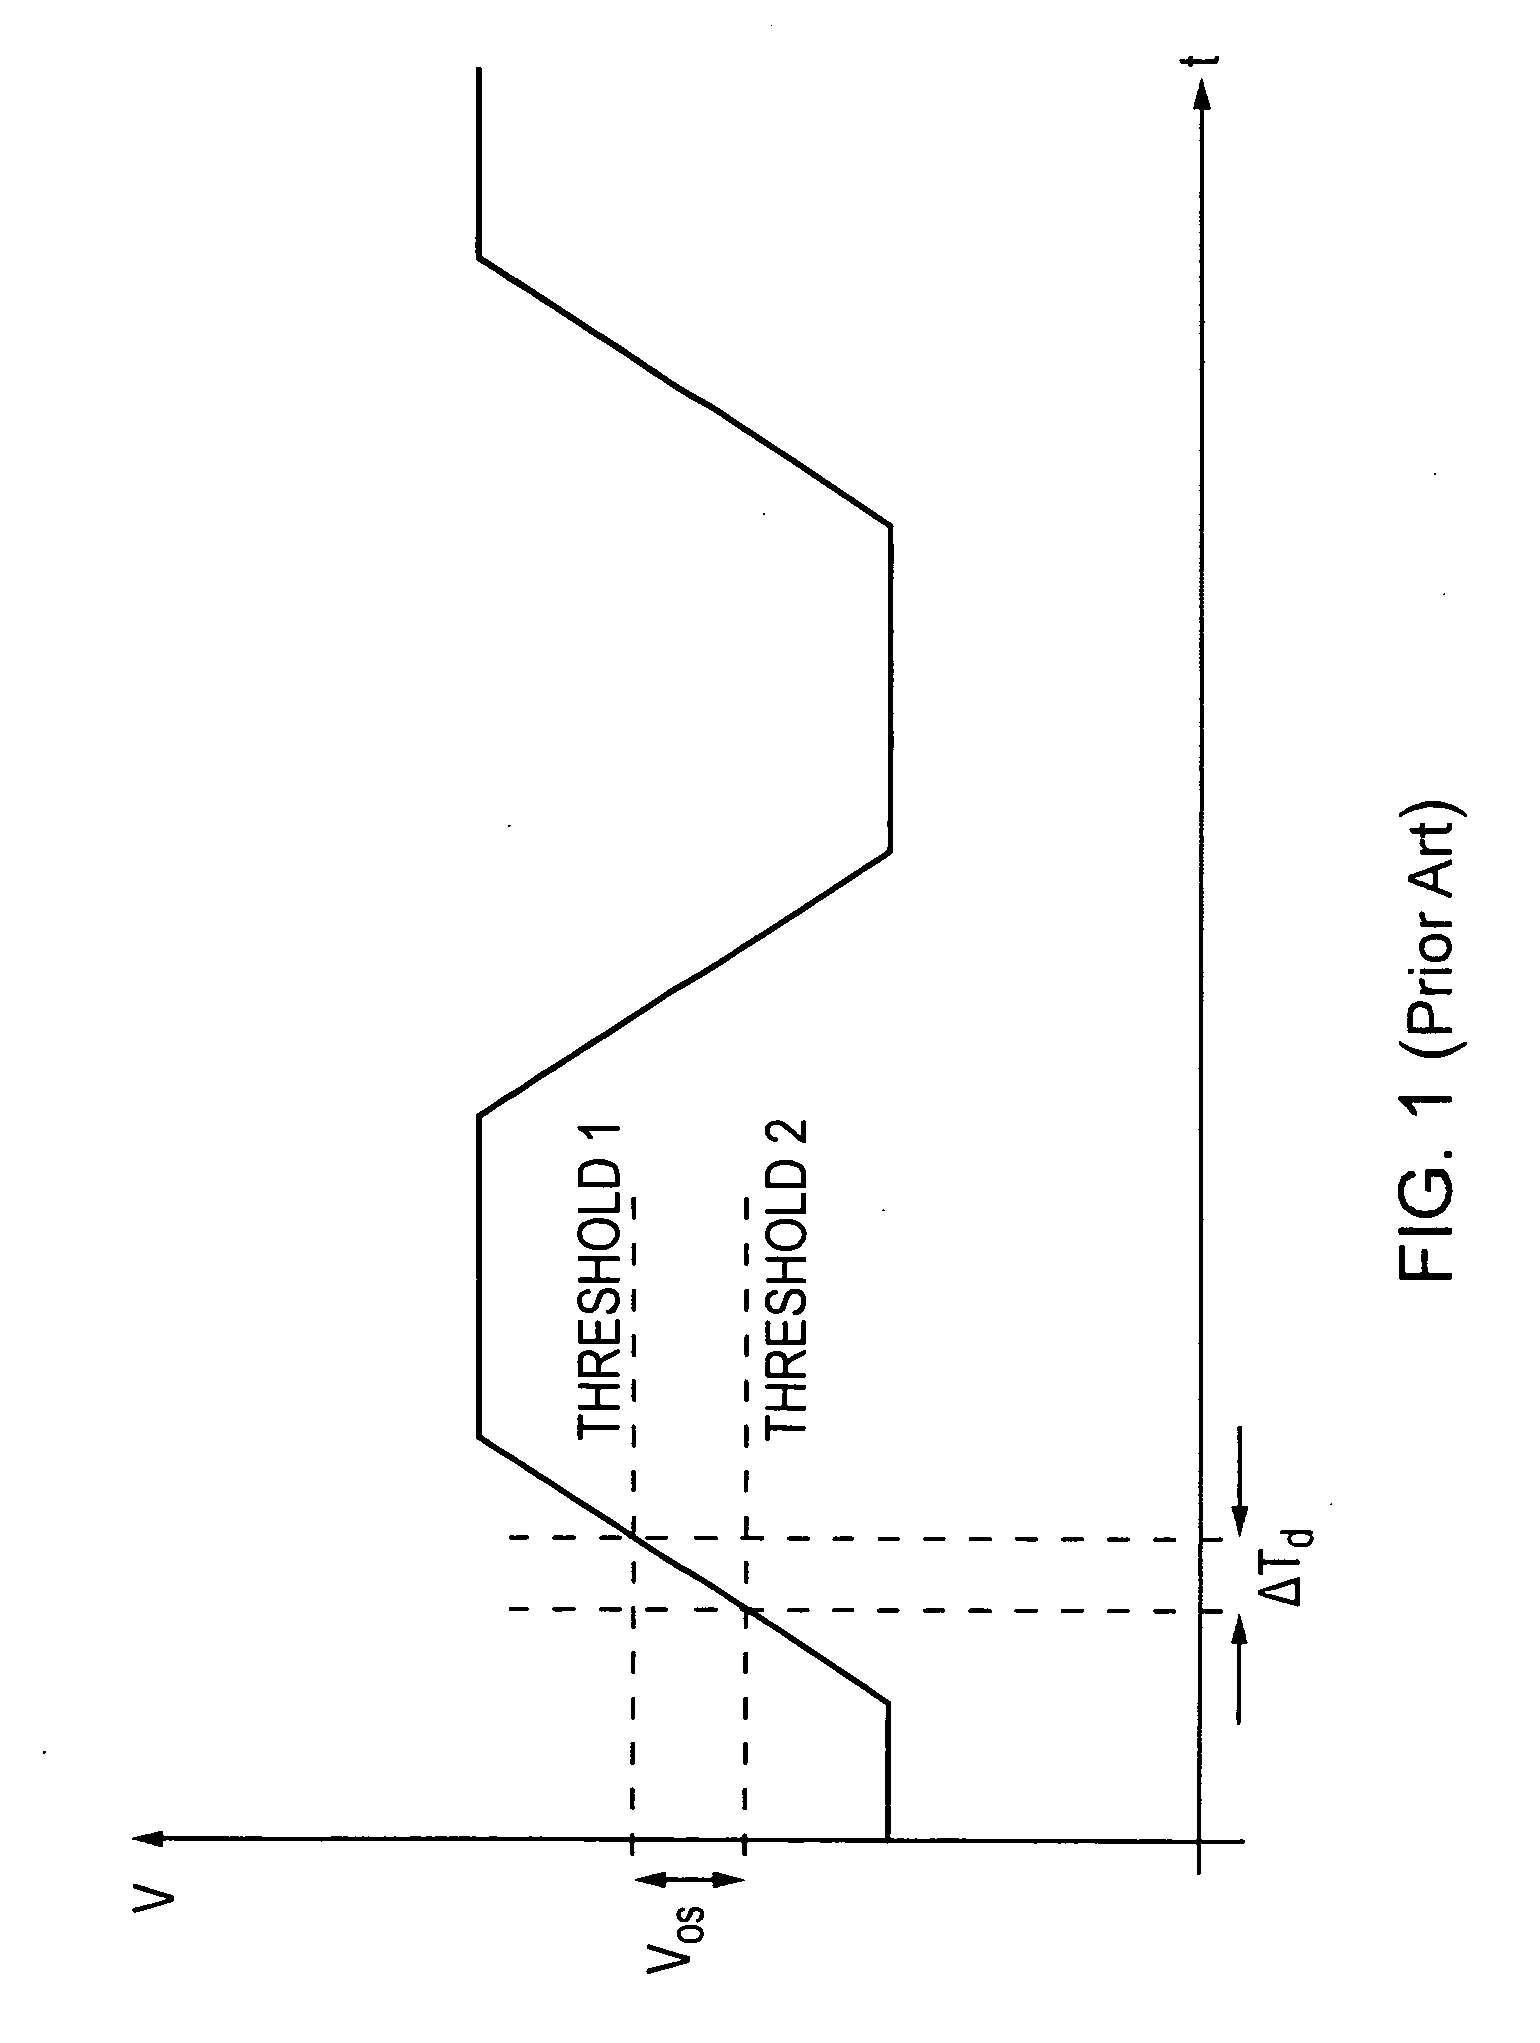 Method of processing signal data with corrected clock phase offset